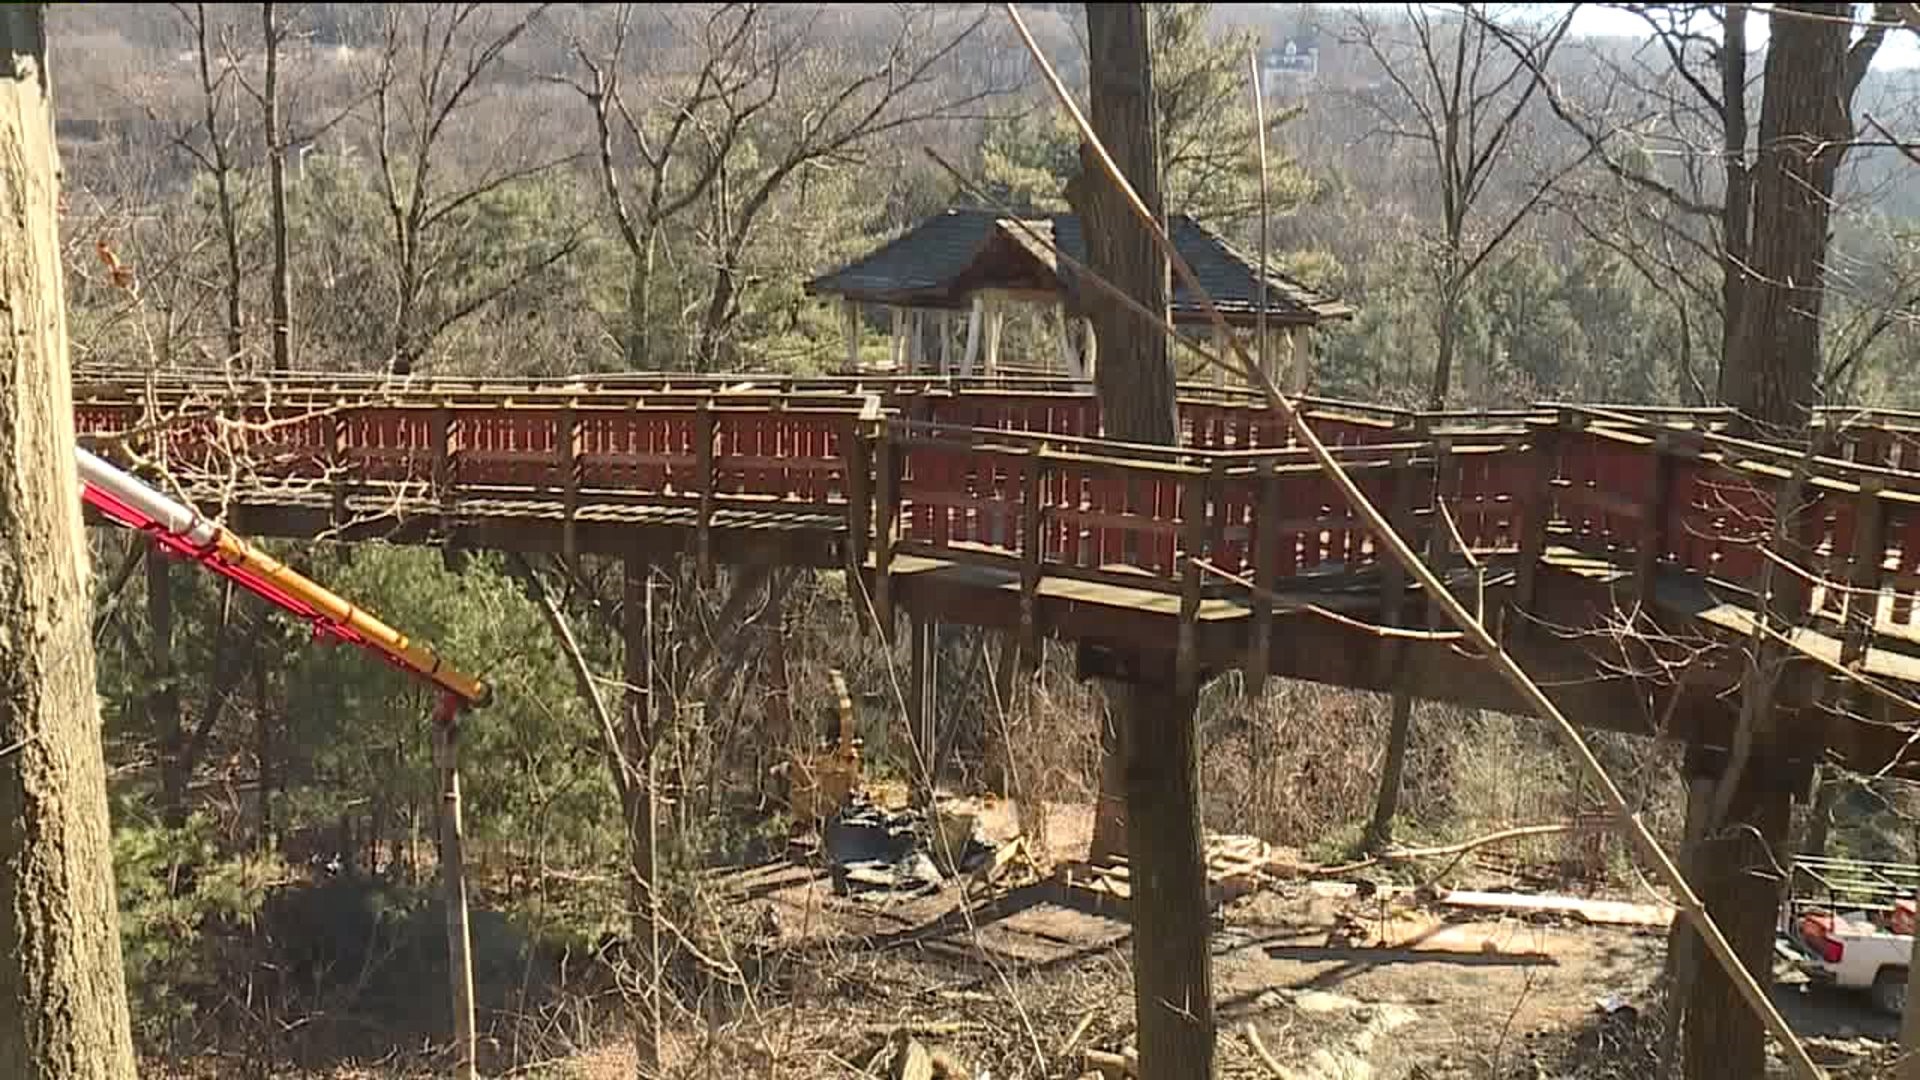 Repairs Begin on Wenzel Treehouse at Nay Aug